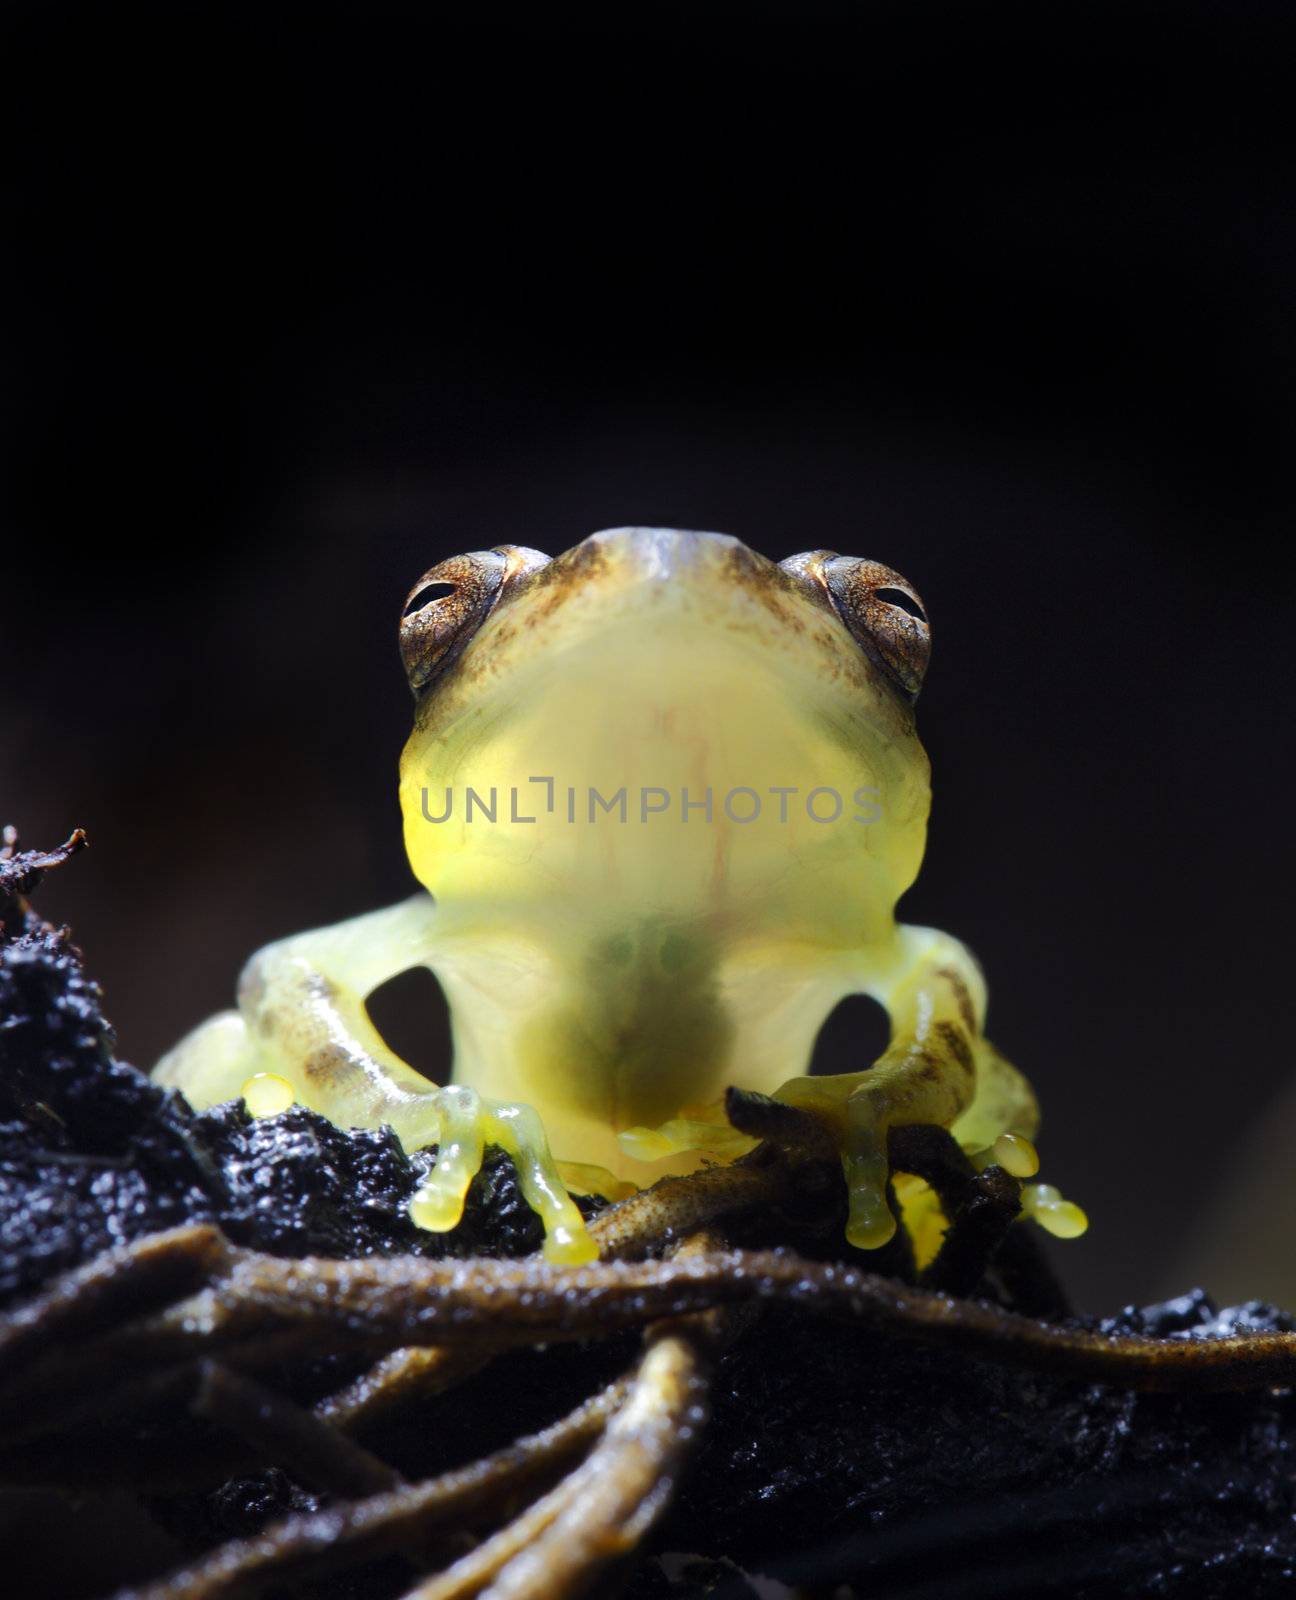 A tiny glass frog (Centrolene prosoblepon) sitting on some vines in the jungle with its organs visible through its body. Focus on the frogs eyes. These frogs inhabit central and south america including the countries of Colombia, Costa Rica, Ecuador, Honduras, Nicaragua, and Panama.